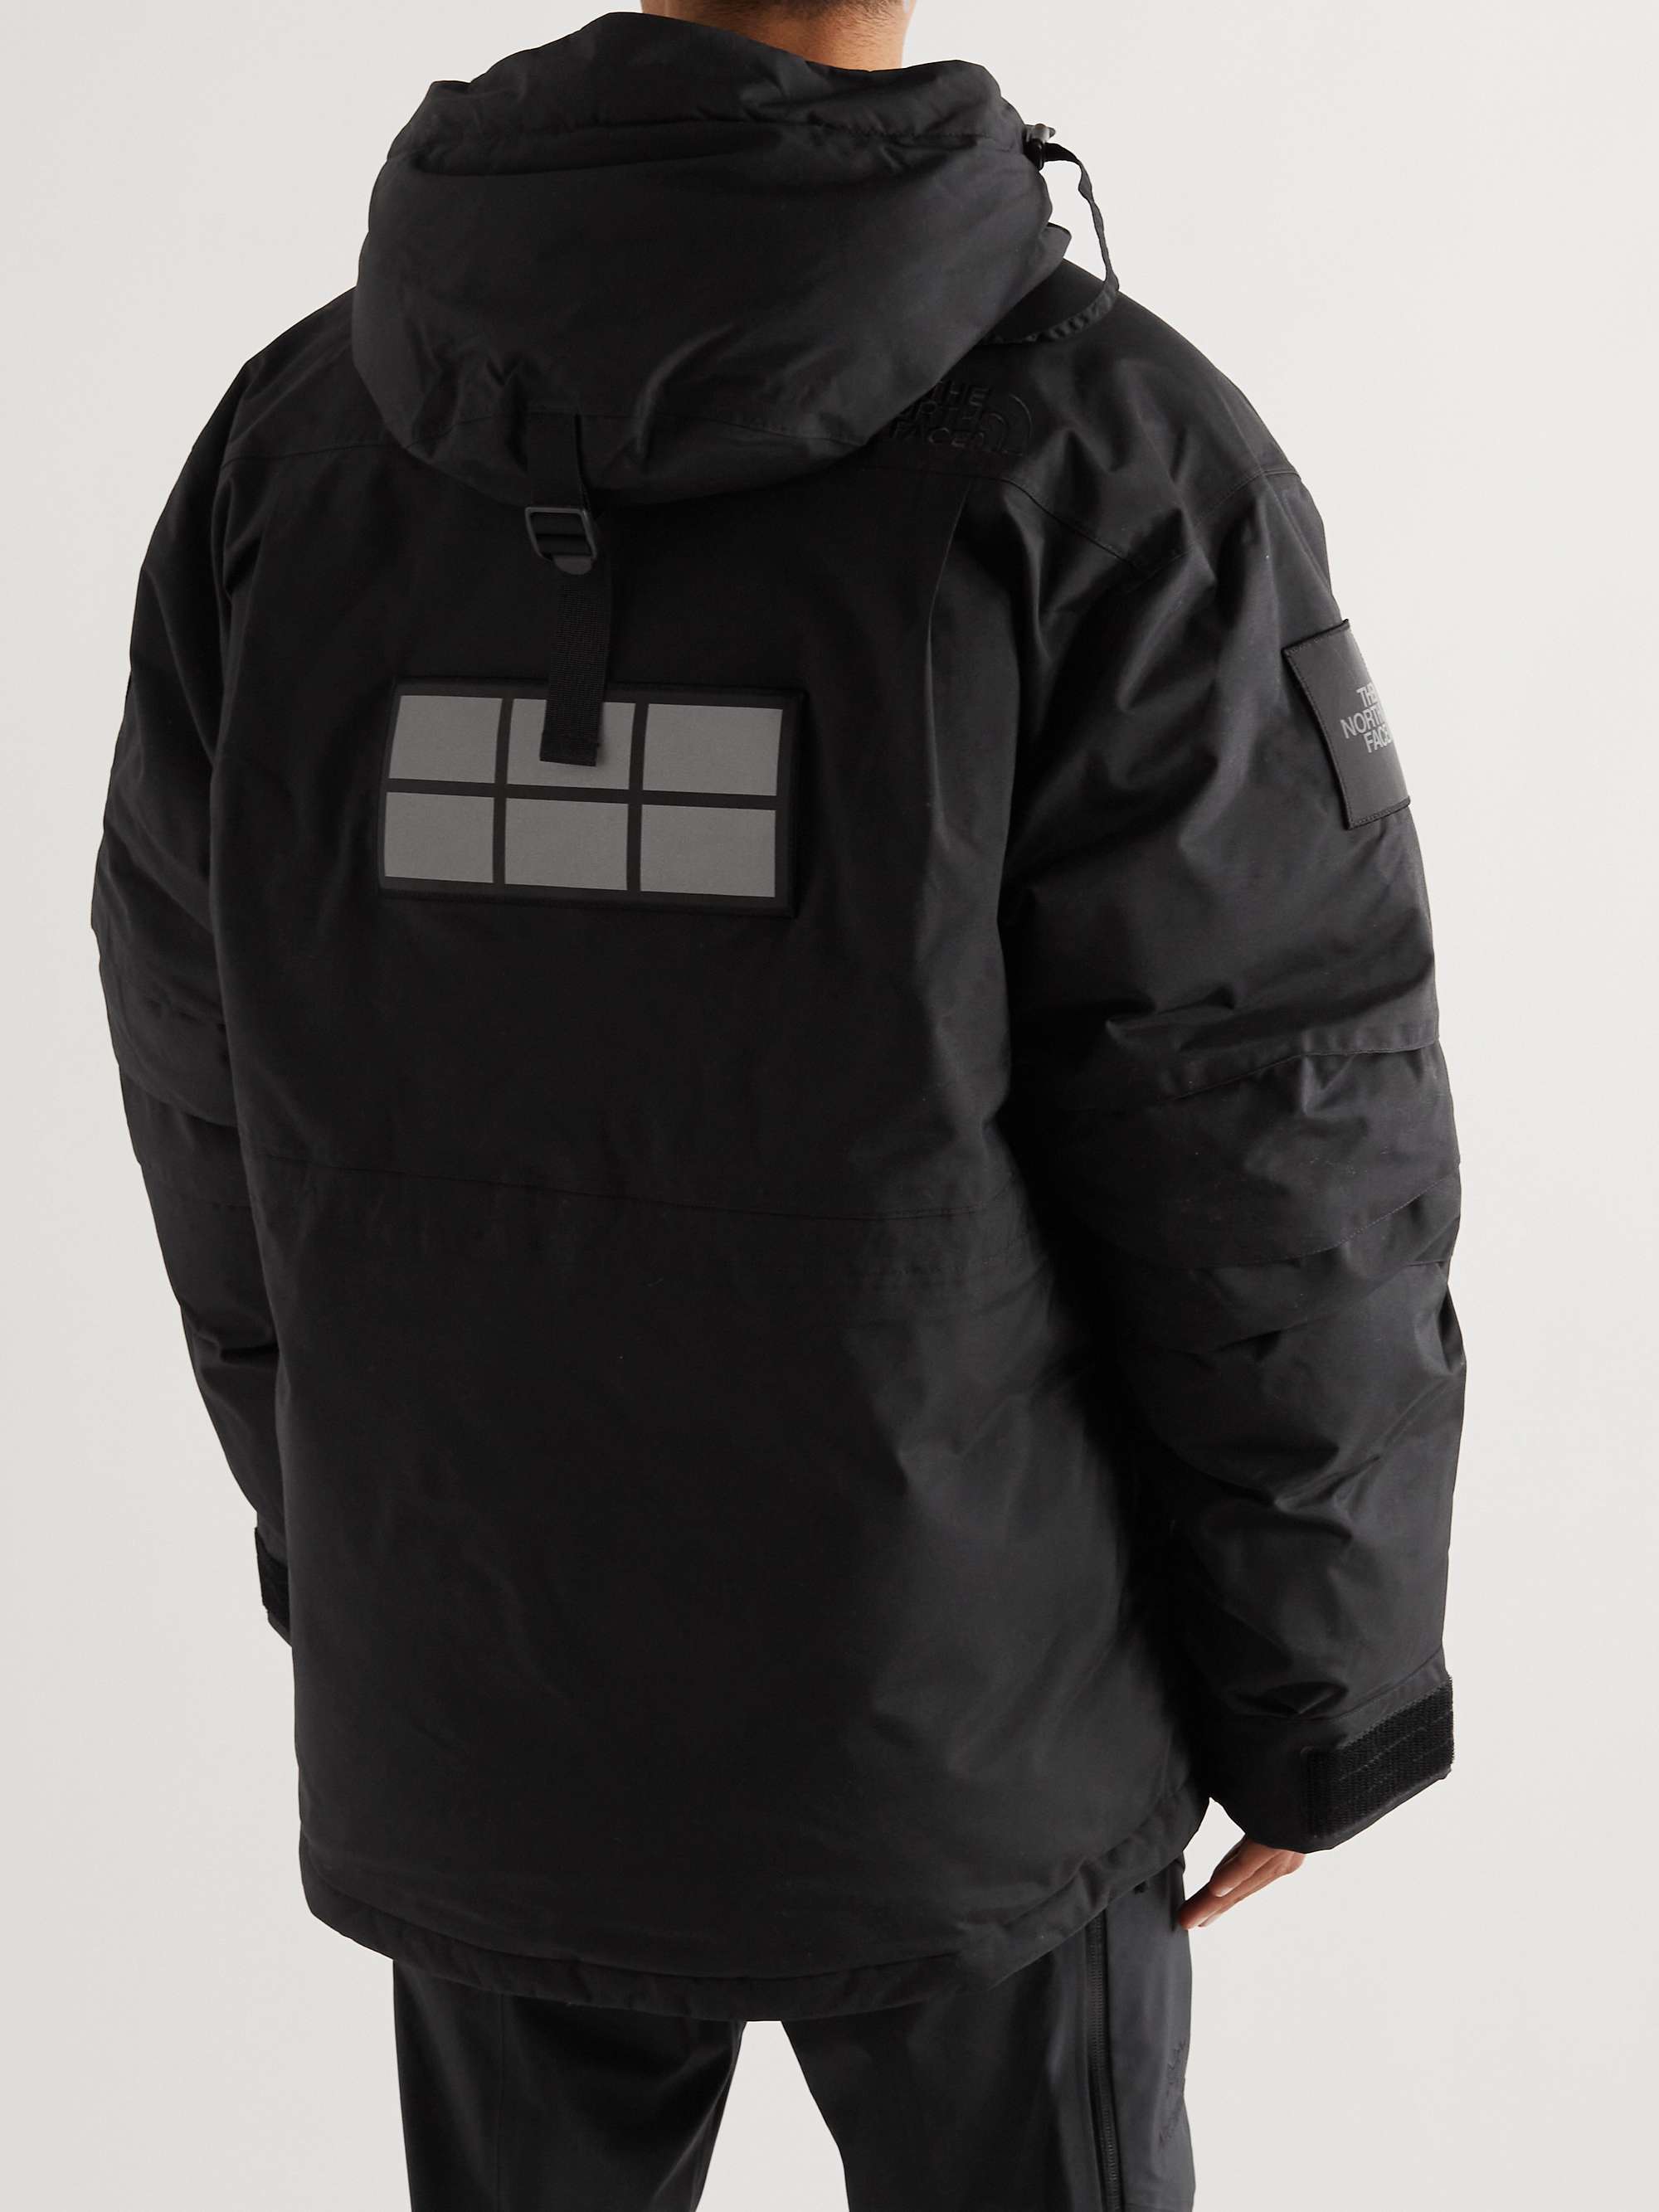 THE NORTH FACE Trans-Antarctica Expedition DryVent Hooded Down Parka